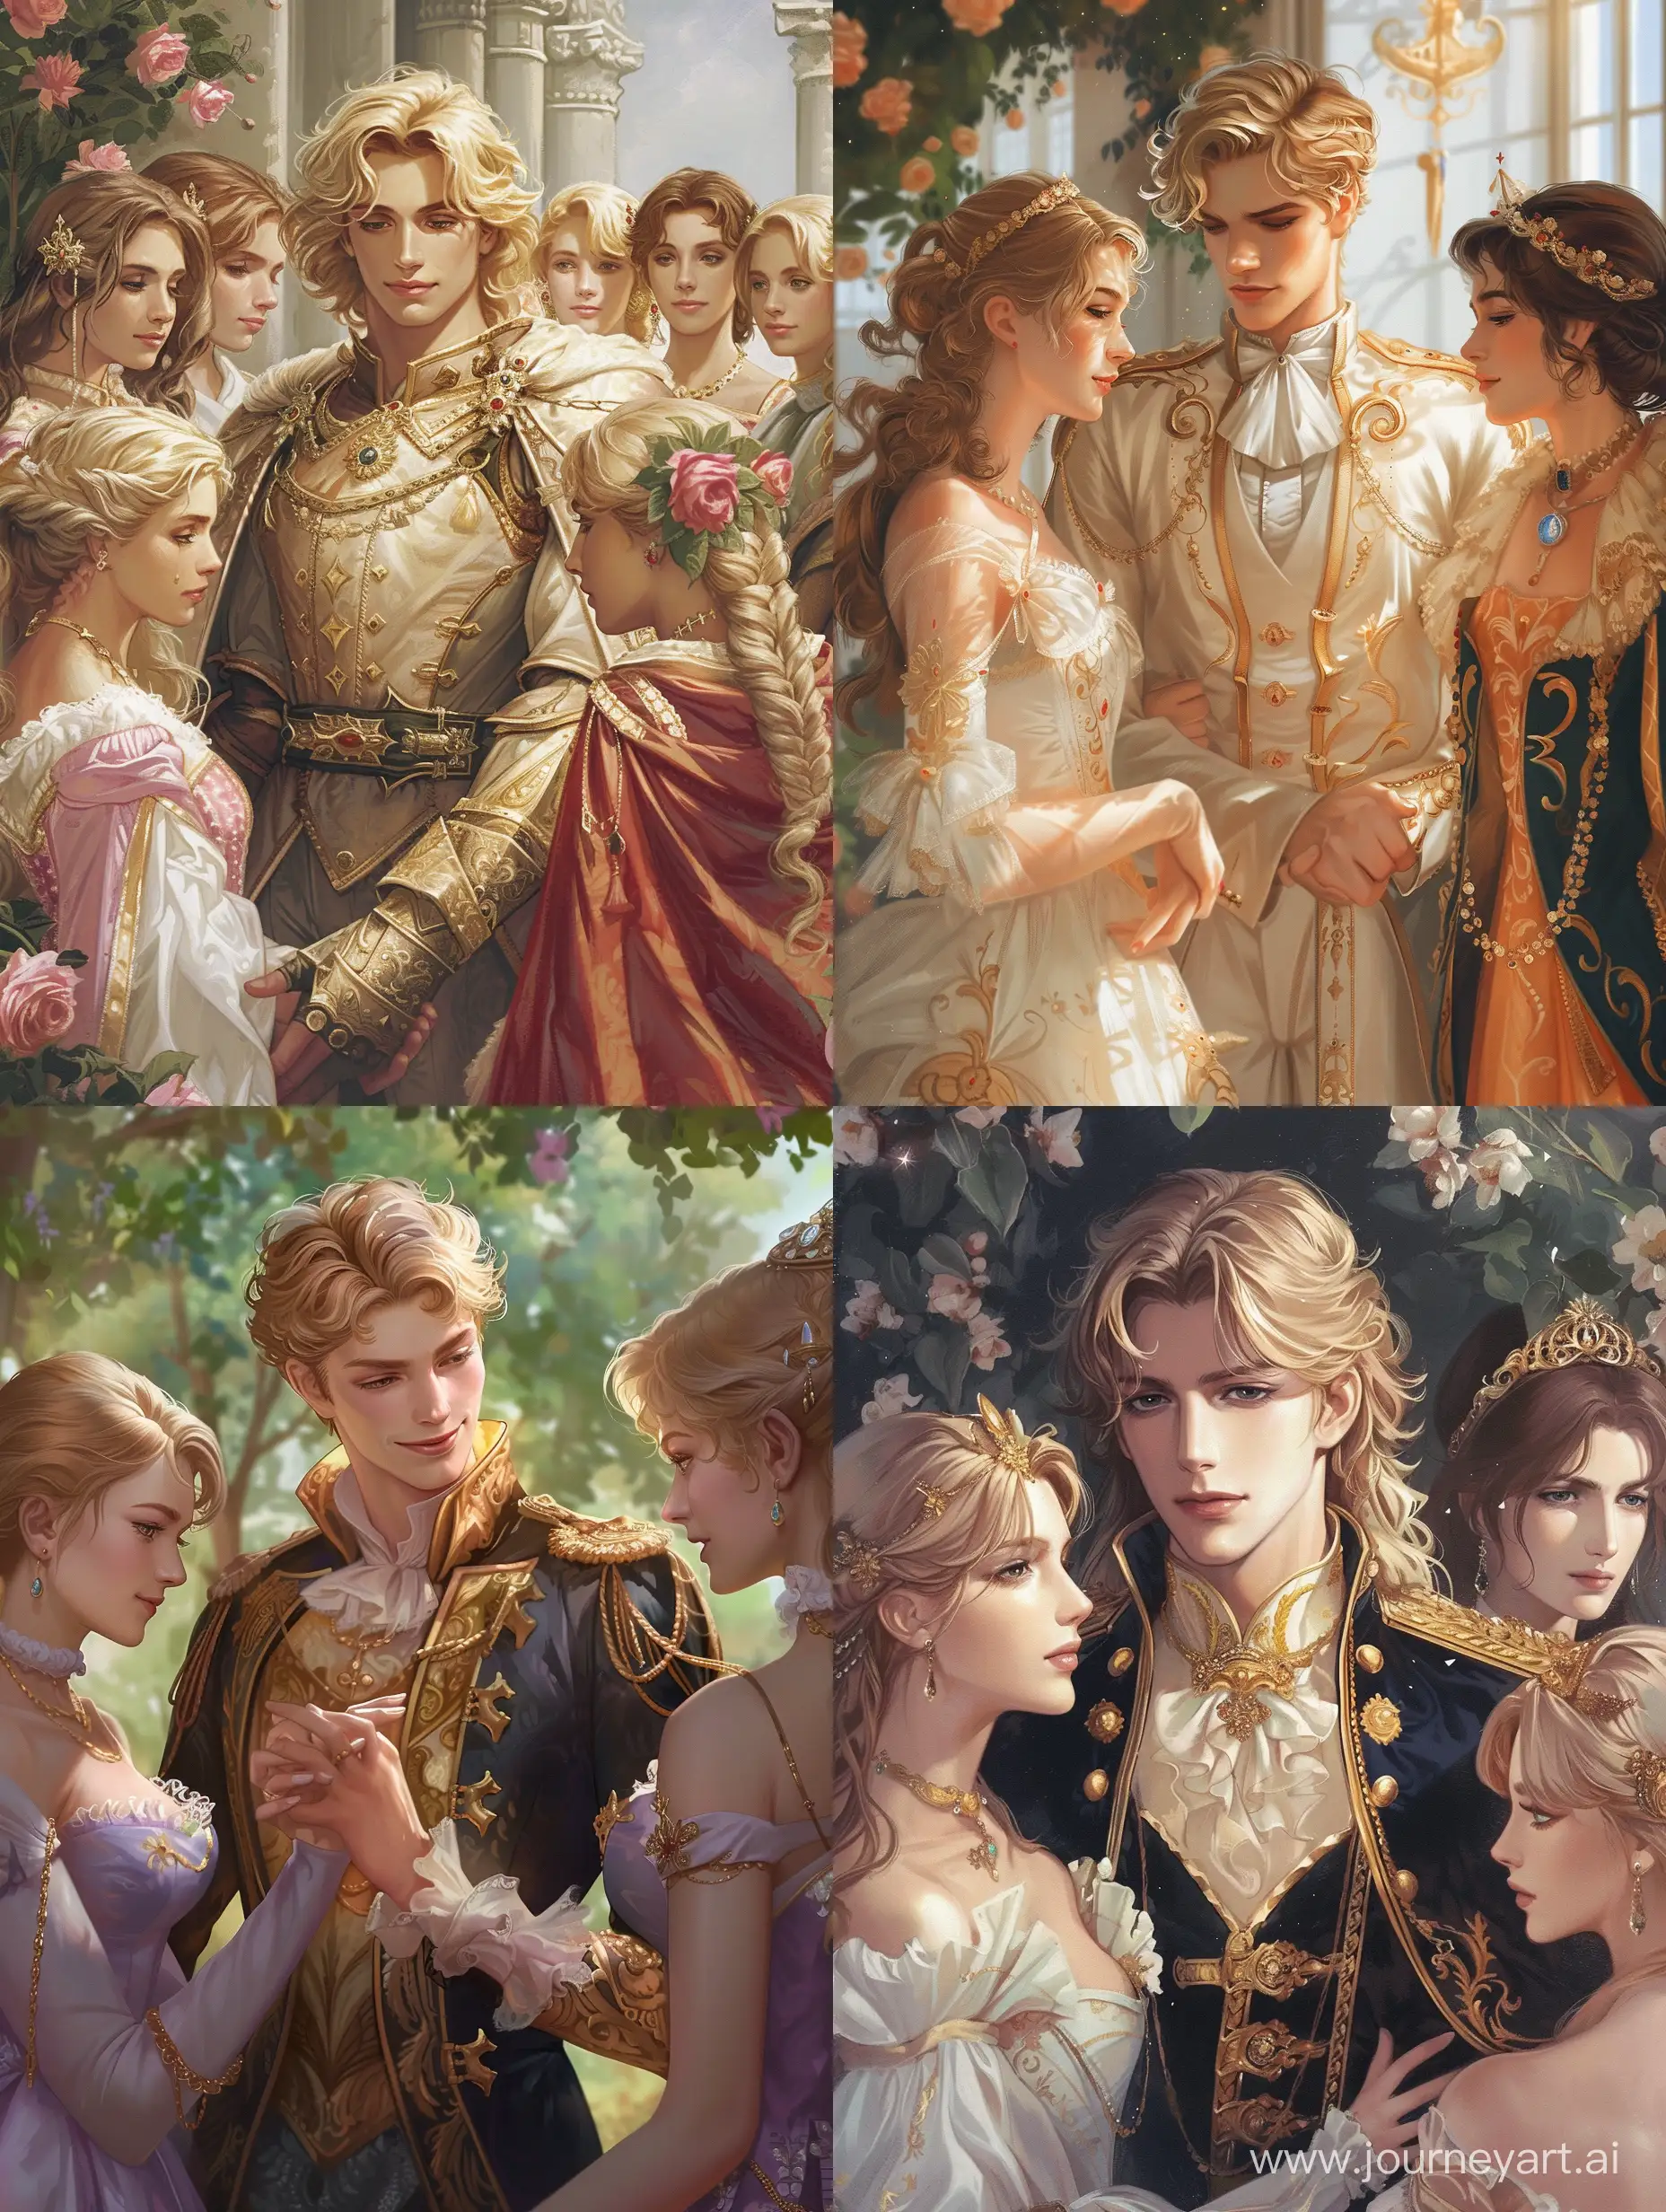 Blond-Prince-Selecting-Brides-in-a-Fantasy-Romance-Scene